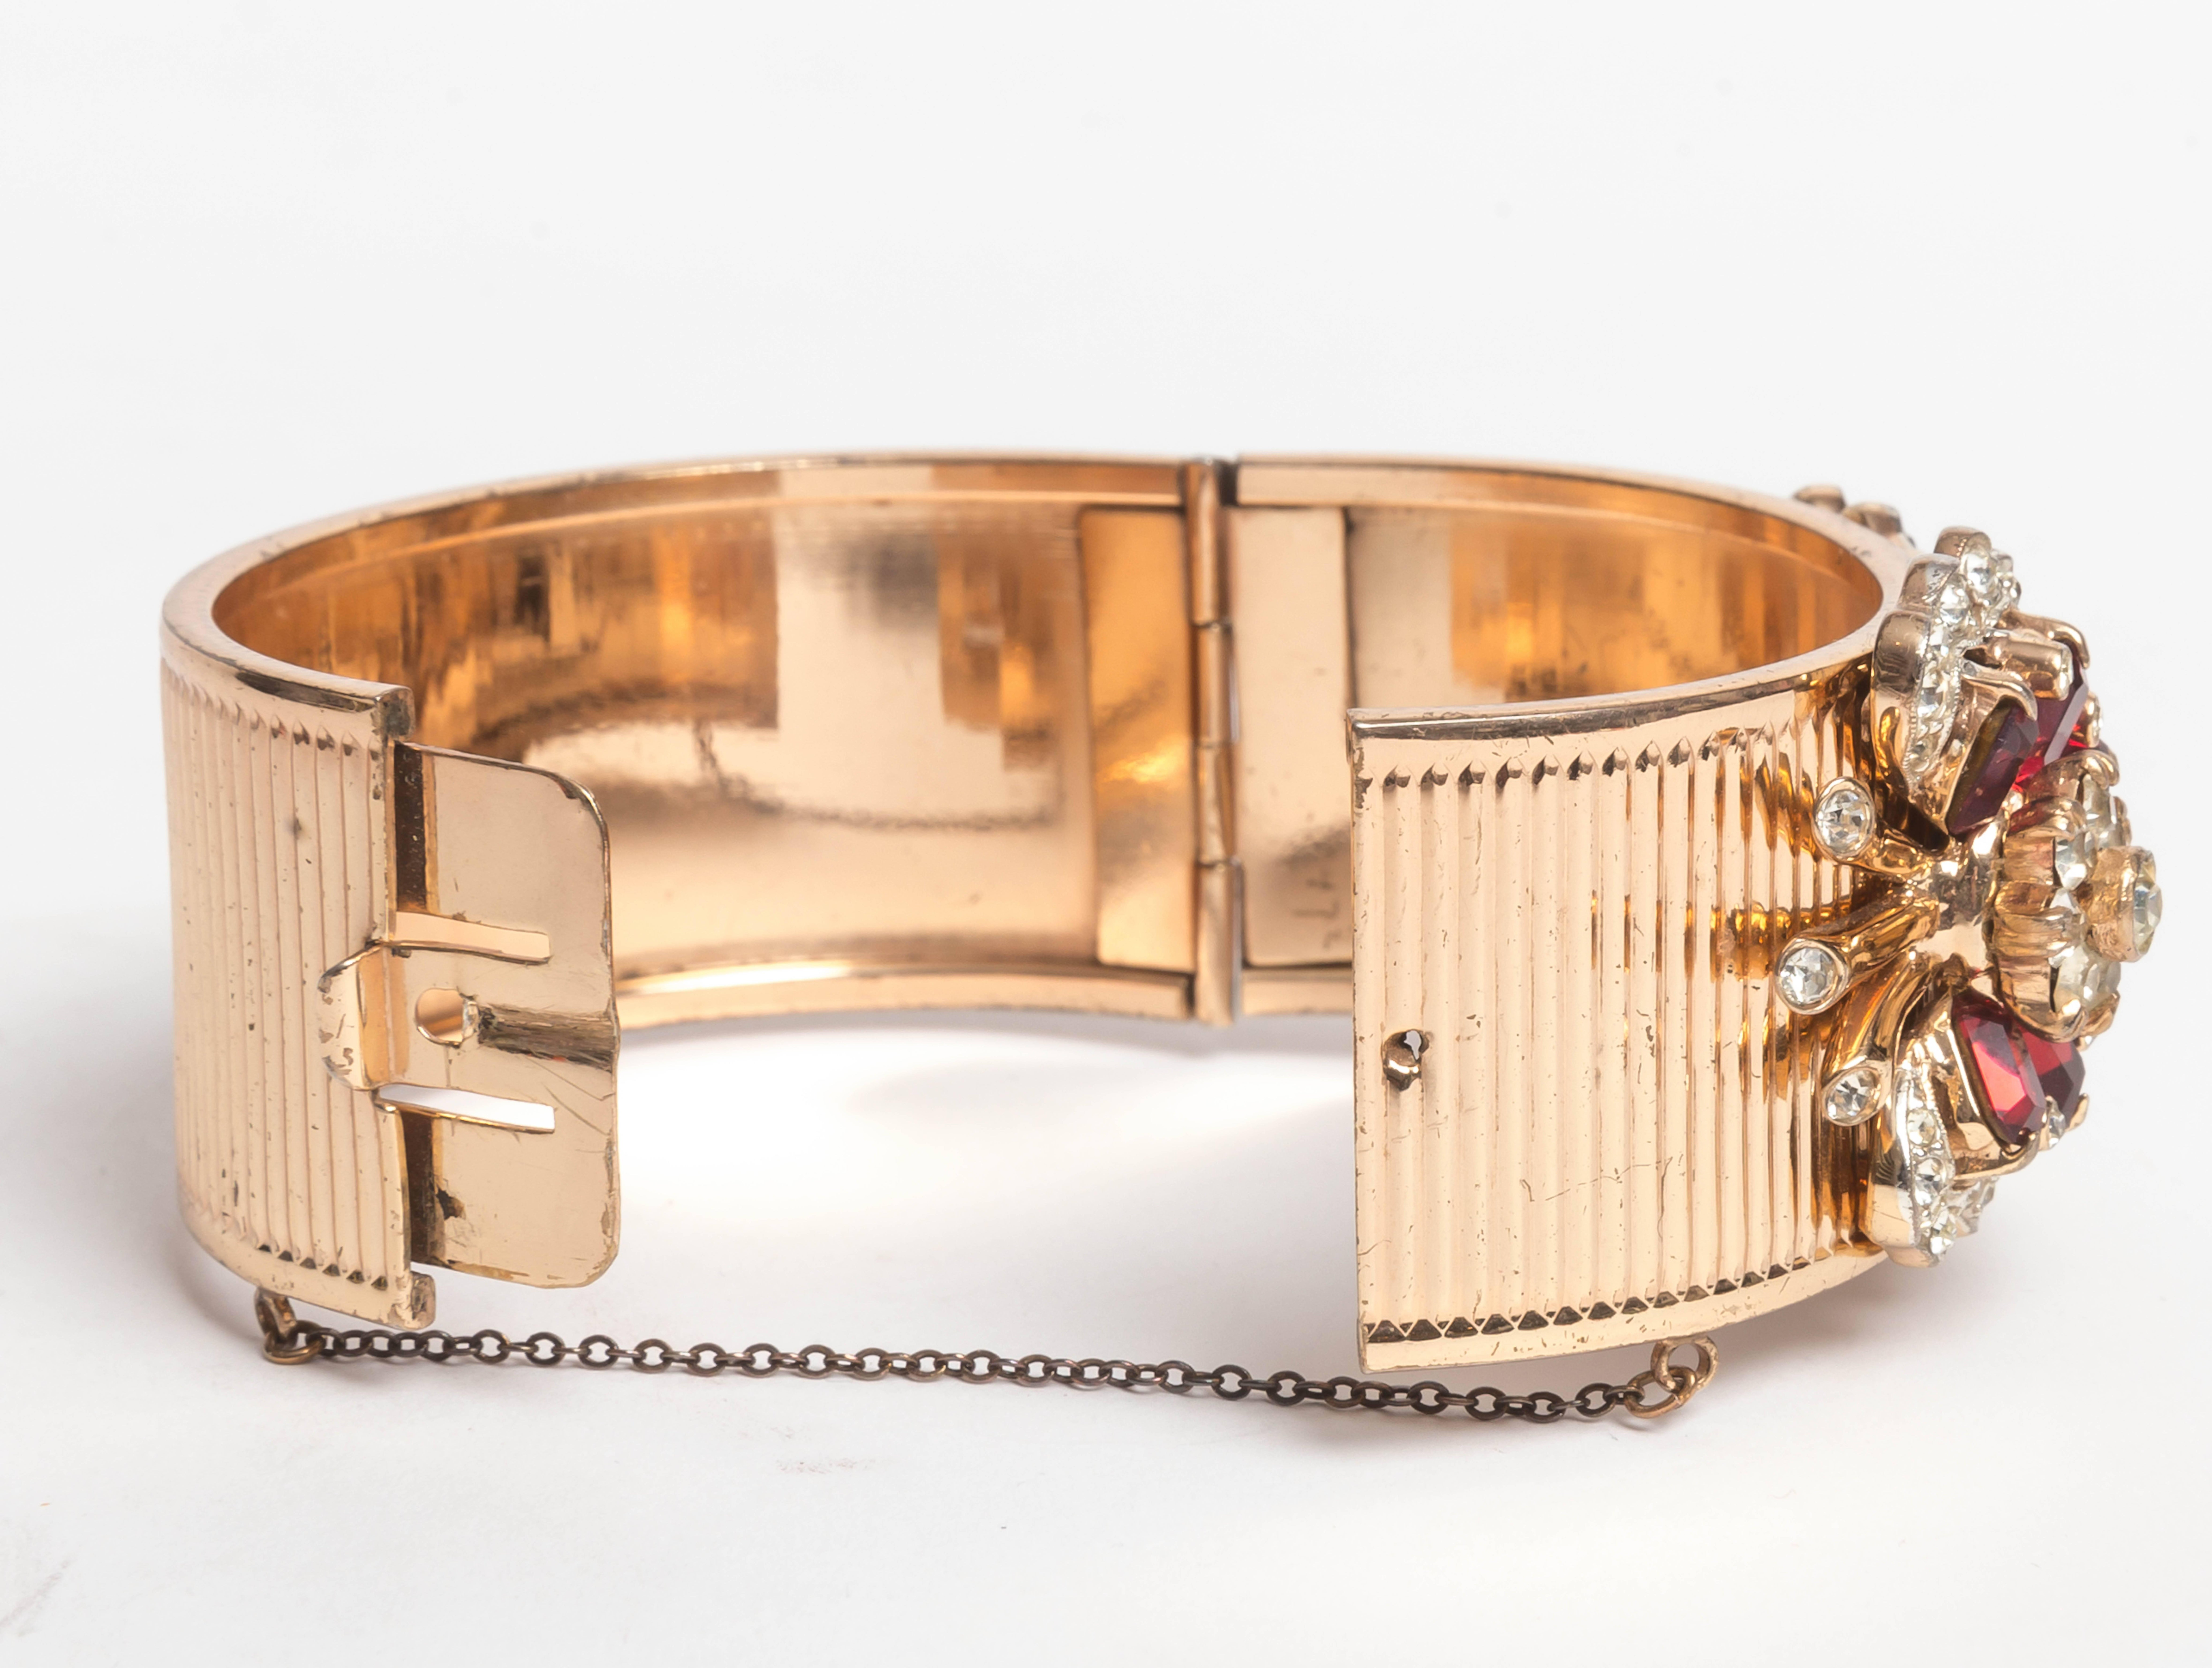 Vintage Gold Washed Sterling Silver Bracelet with Detachable Dress Clips In Excellent Condition For Sale In Westhampton Beach, NY